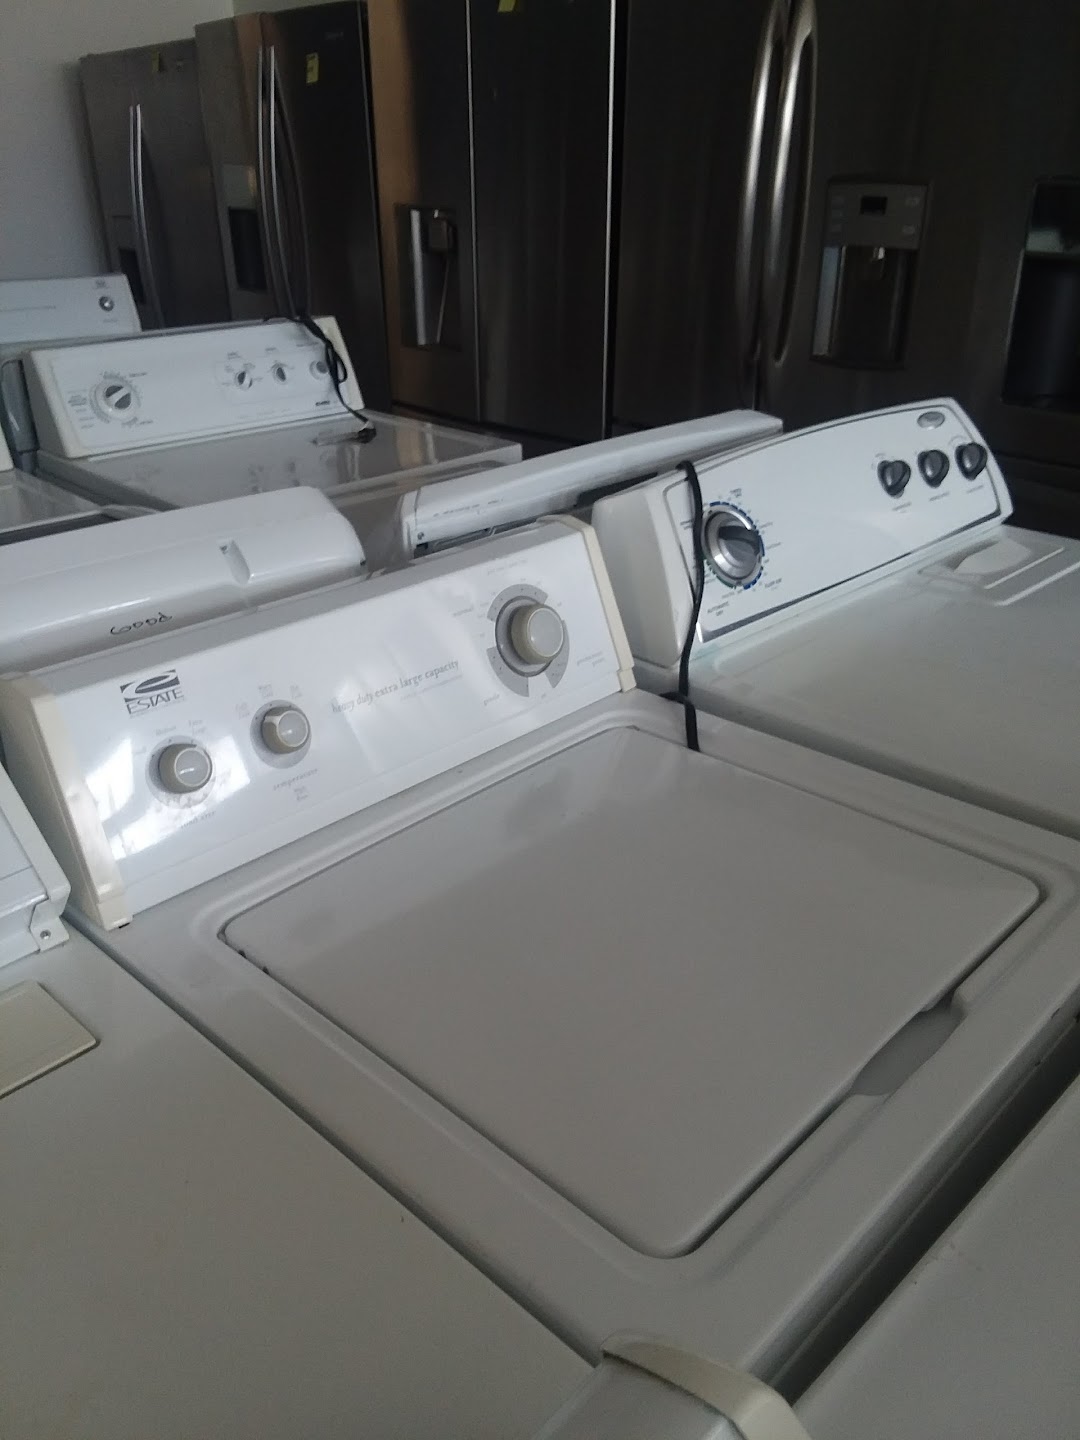 Appliance Empire For Less | Used Appliance Store, Major Appliance Repair Service, Appliance Installation Indianapolis IN